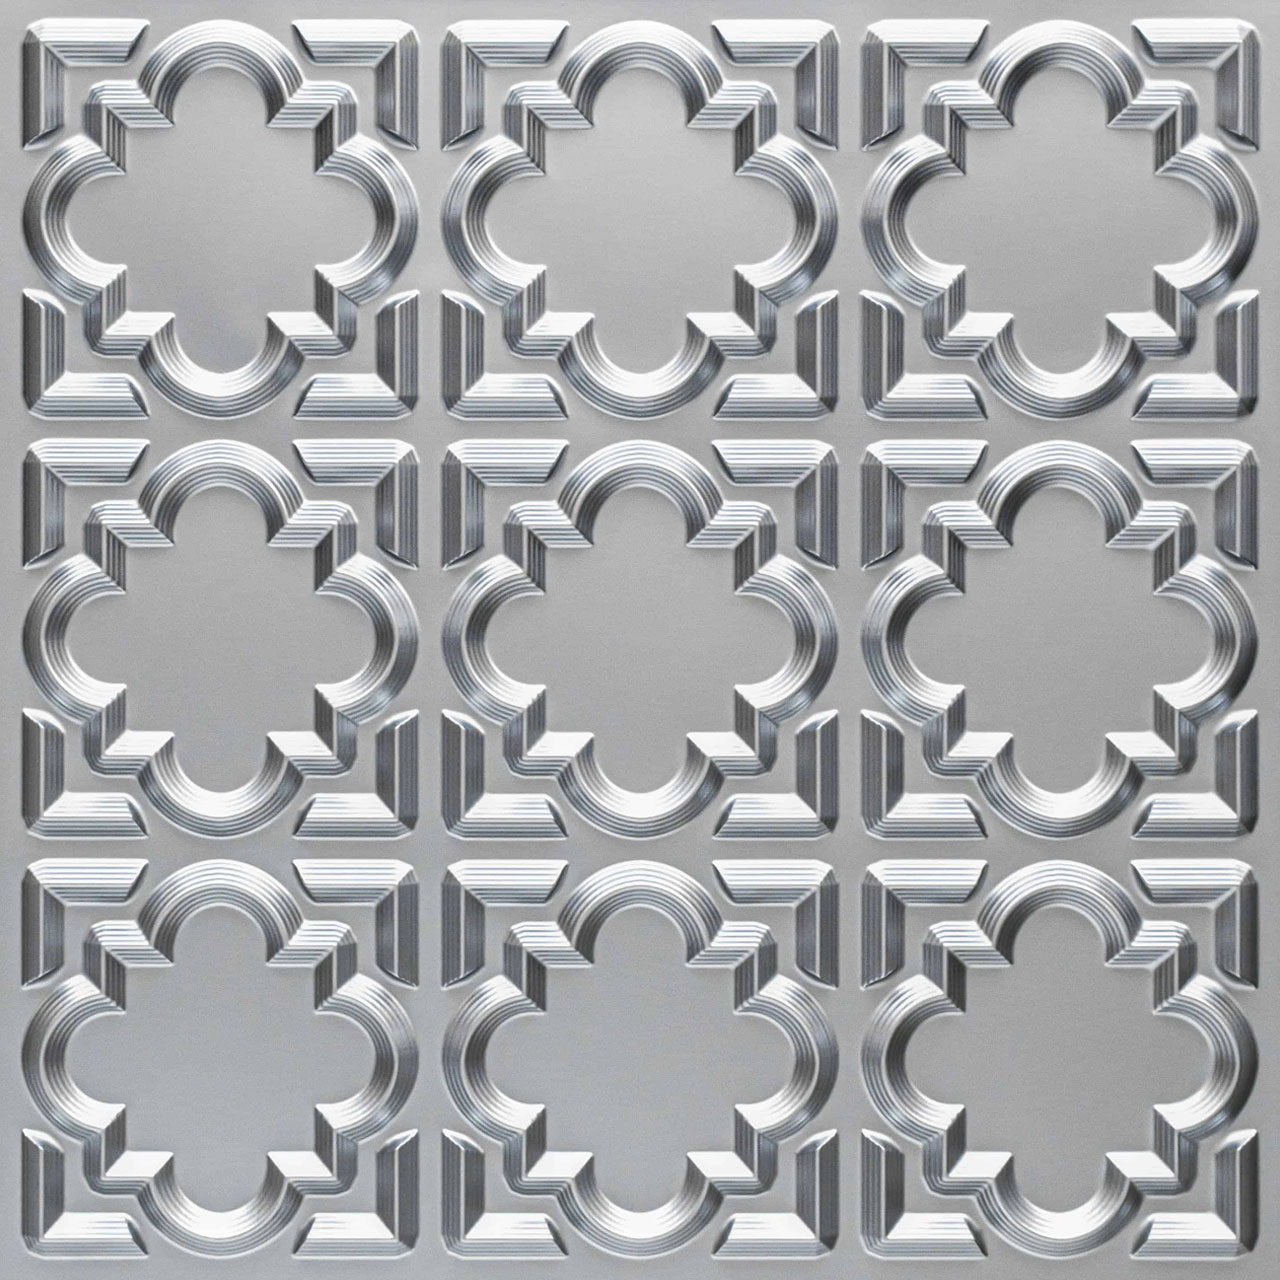 Casablanca - Faux Tin Ceiling Tile - Glue up - 24 in x 24 in - #142